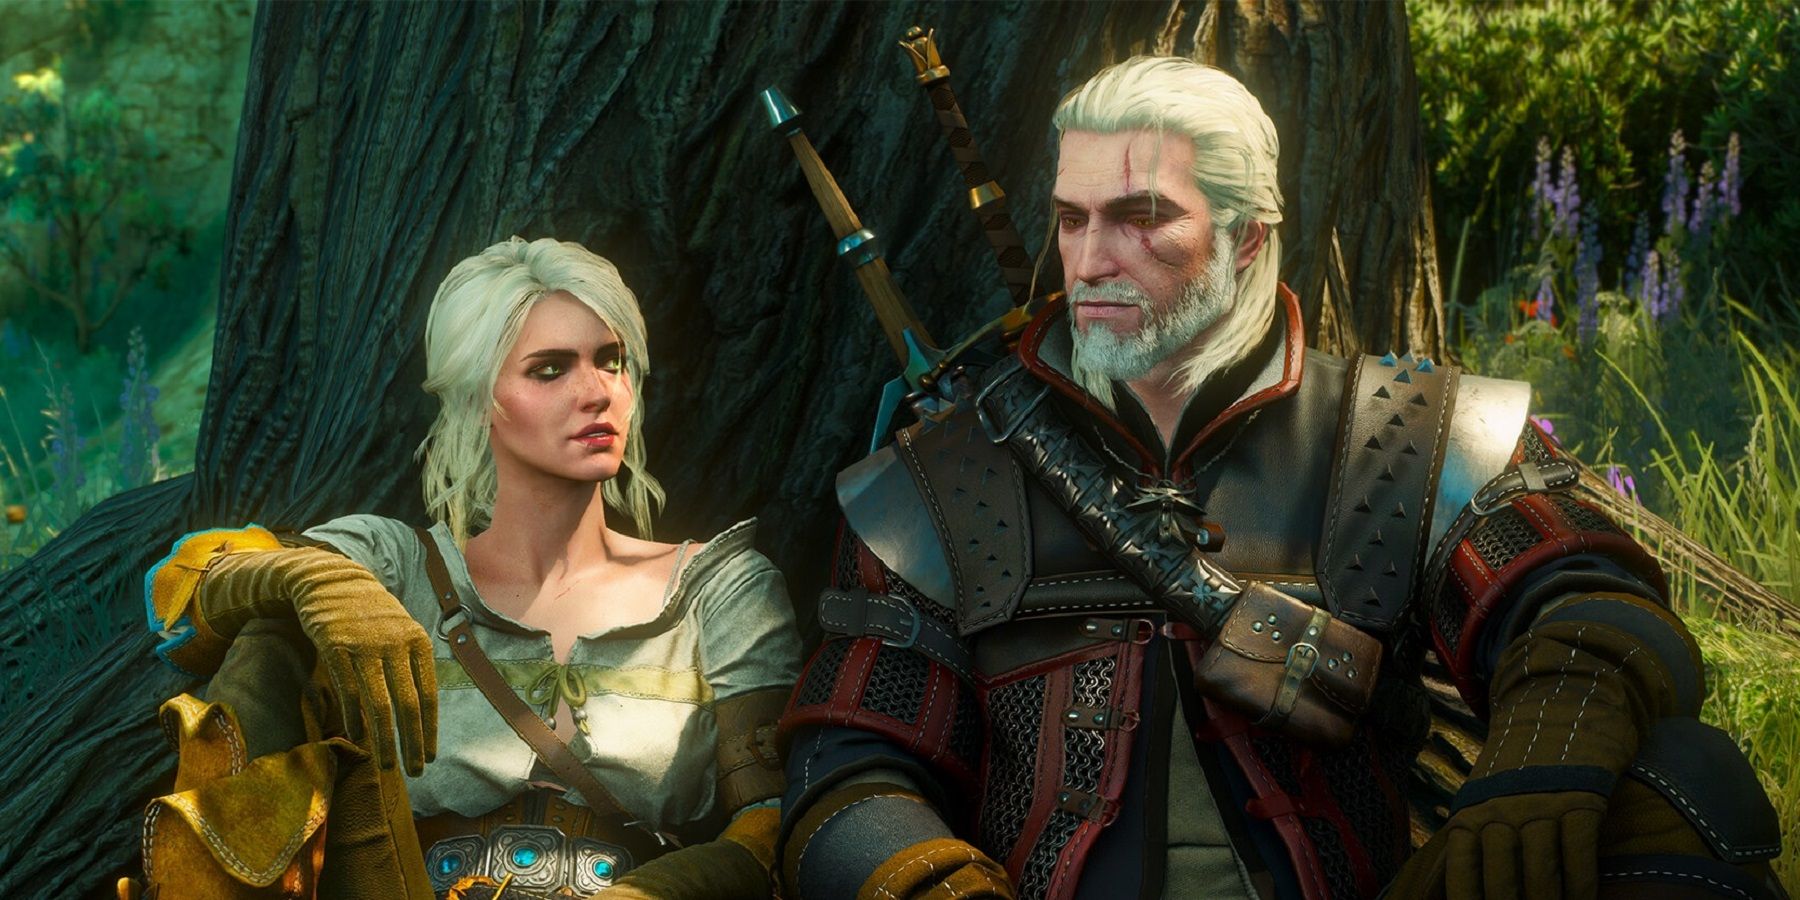 The Witcher 3 Is Coming To PS5/Xbox Series X With A Free Upgrade